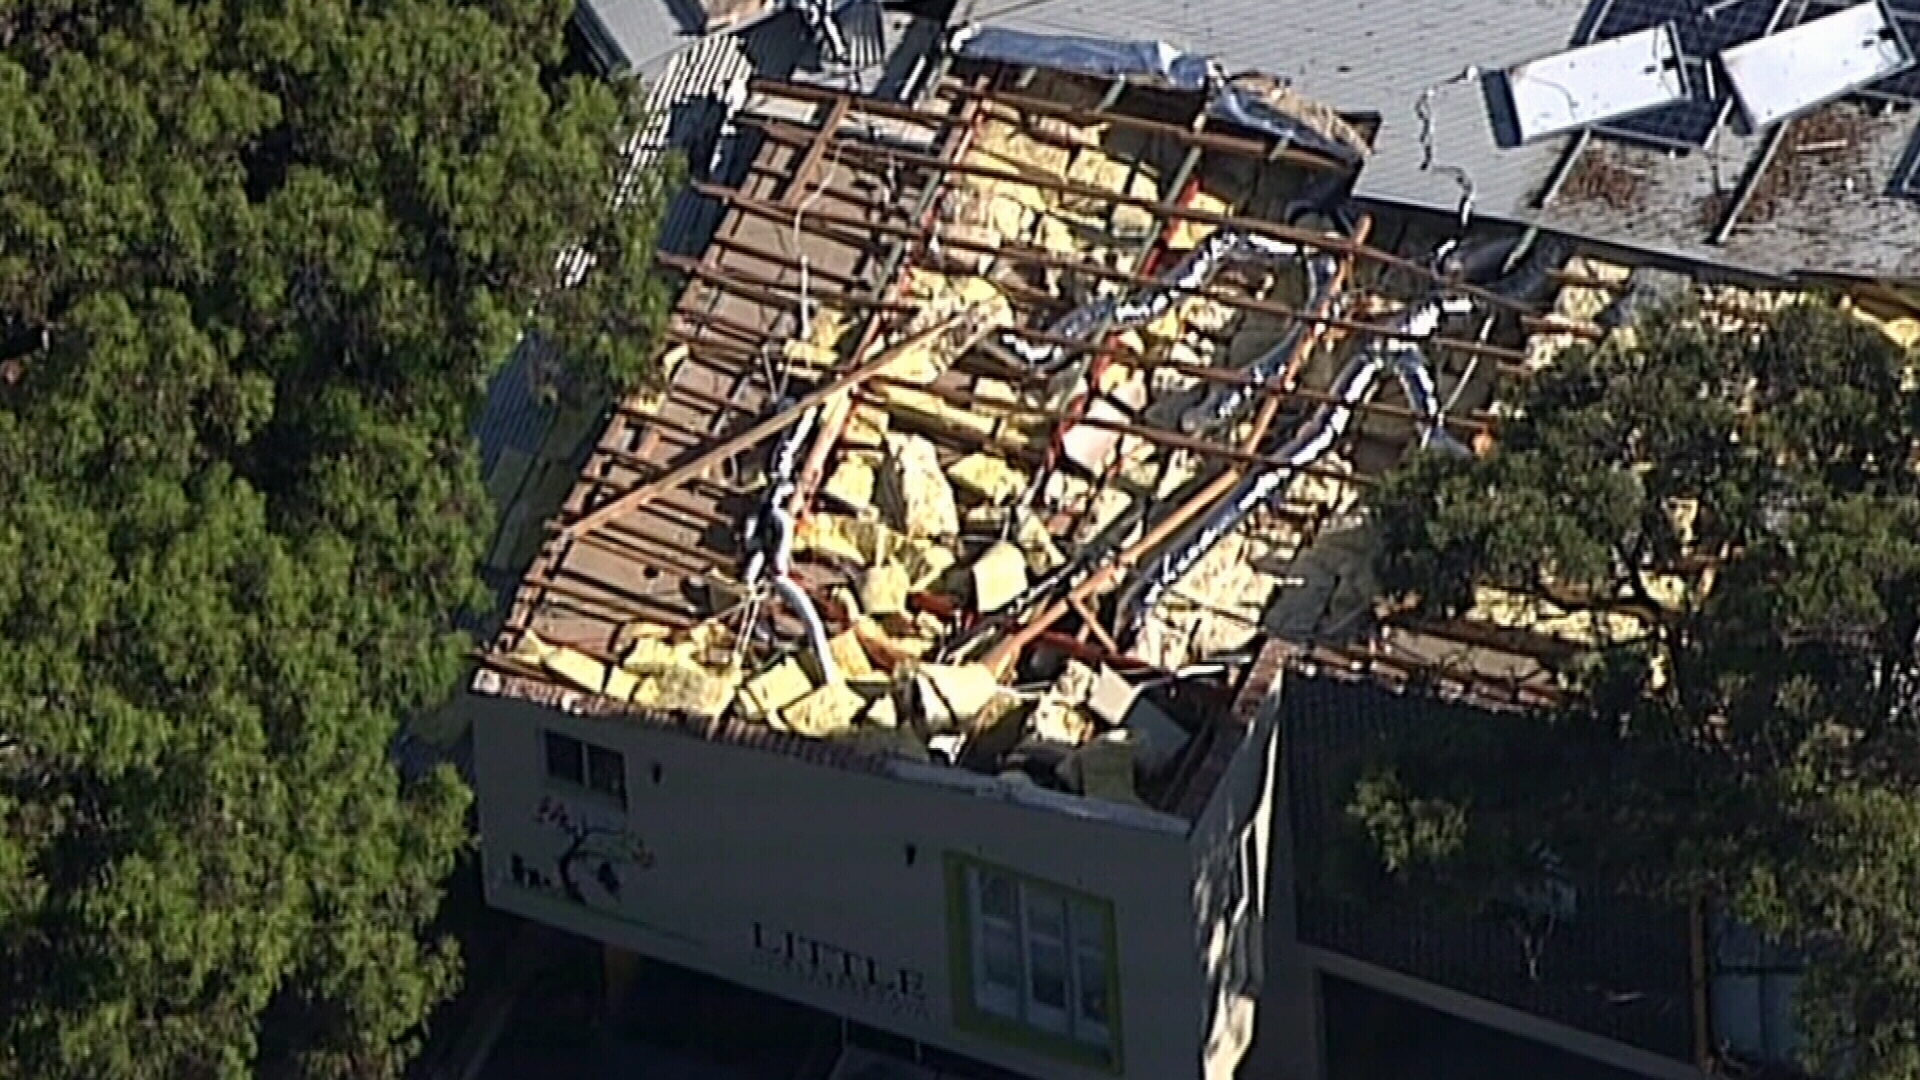 A childcare centre had its roof torn off in the storm.